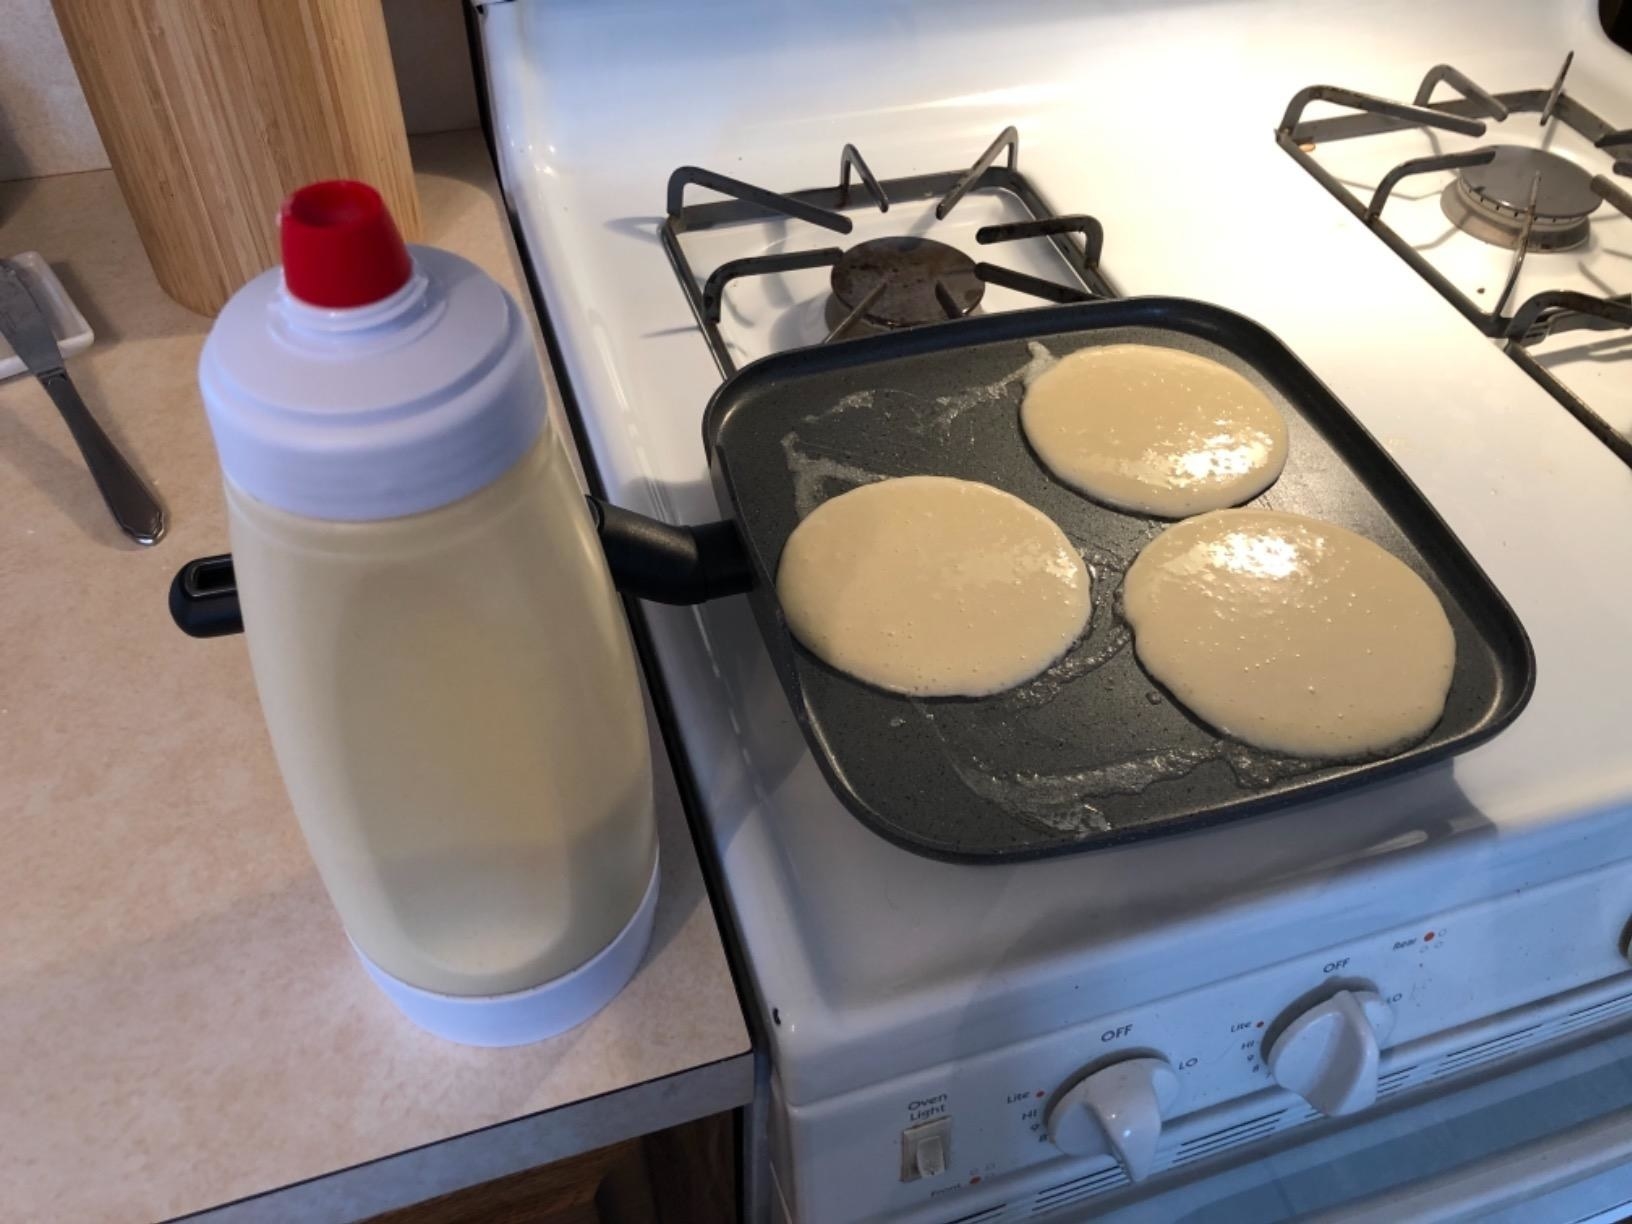 reviewer image of the dispenser next to an oven where three pancakes cook on the stove